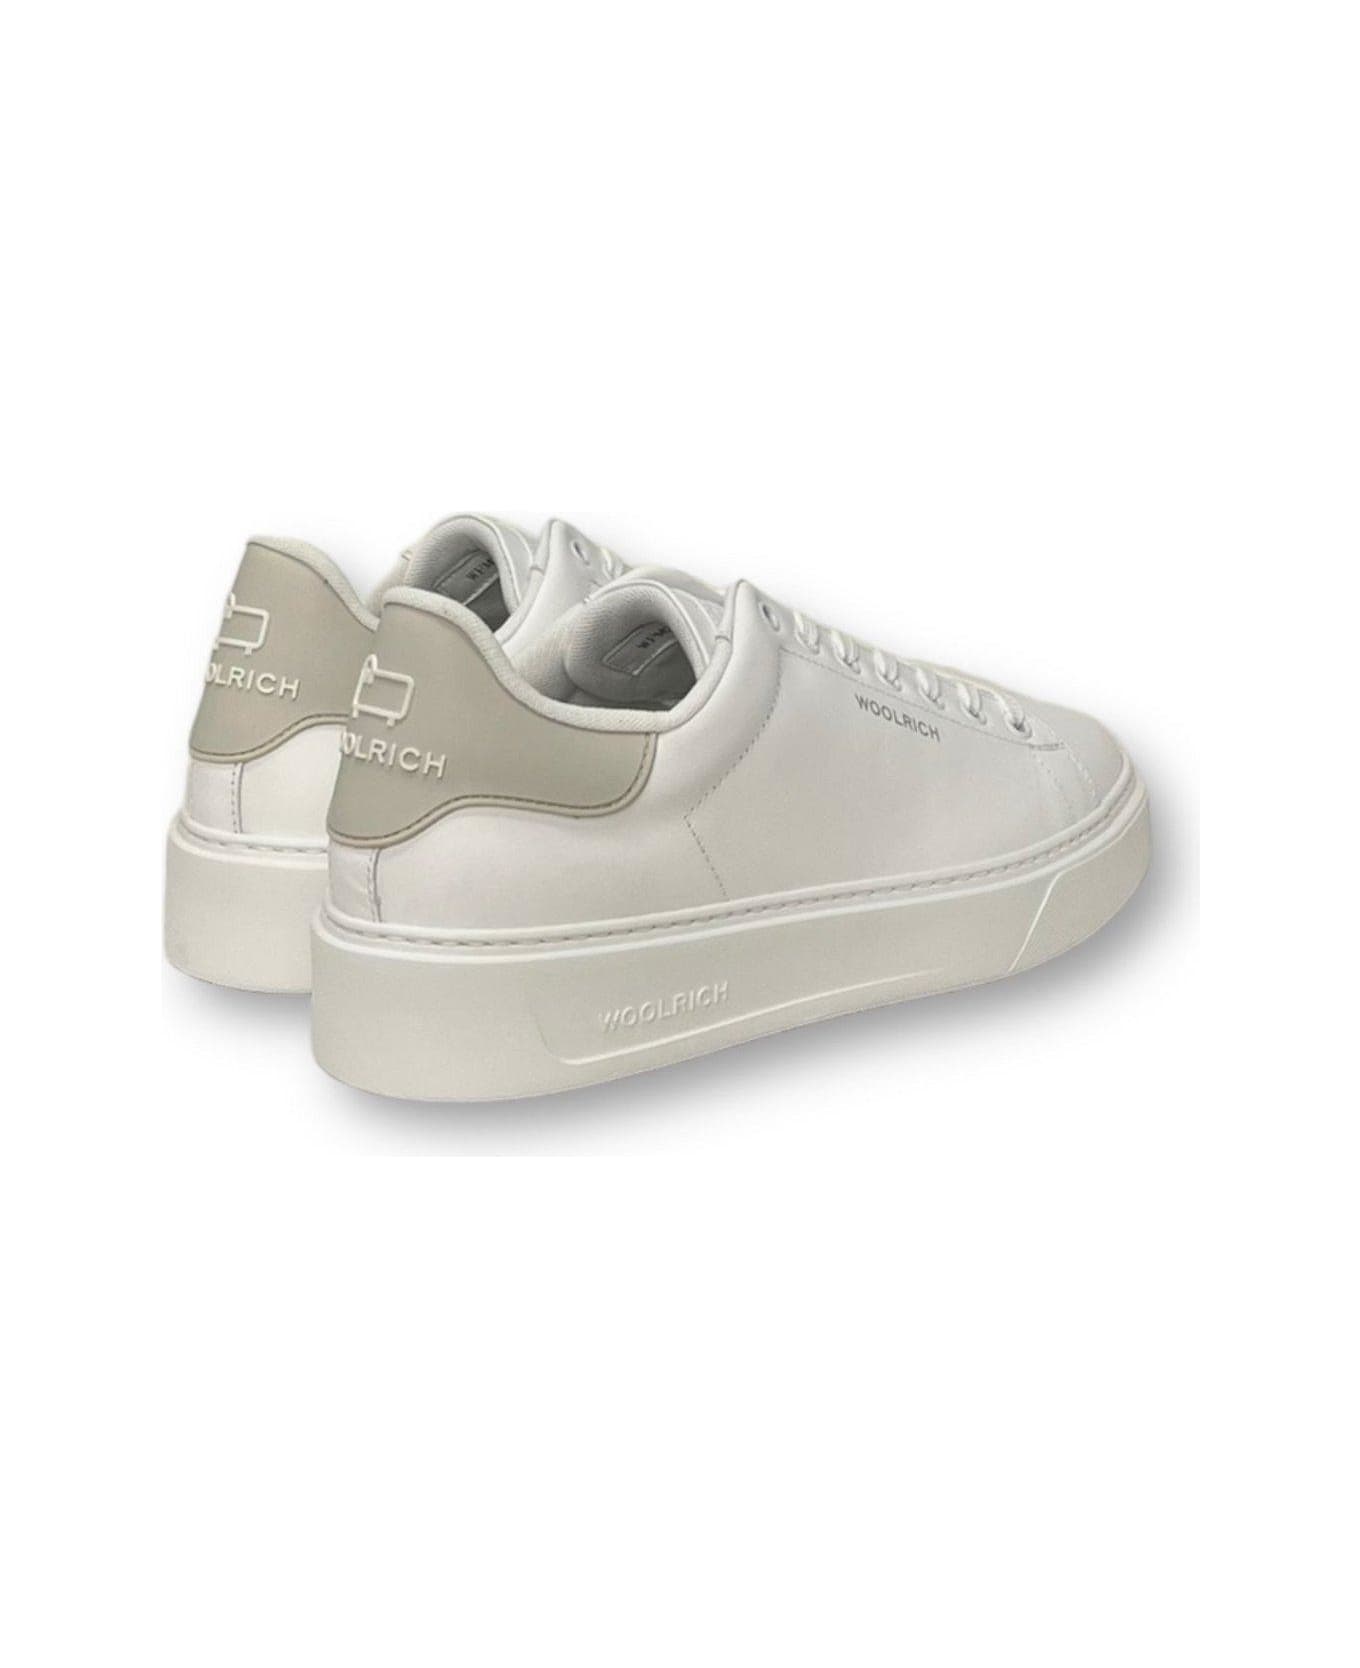 Woolrich Round Toe Lace-up Sneakers Woolrich - WHITE スニーカー